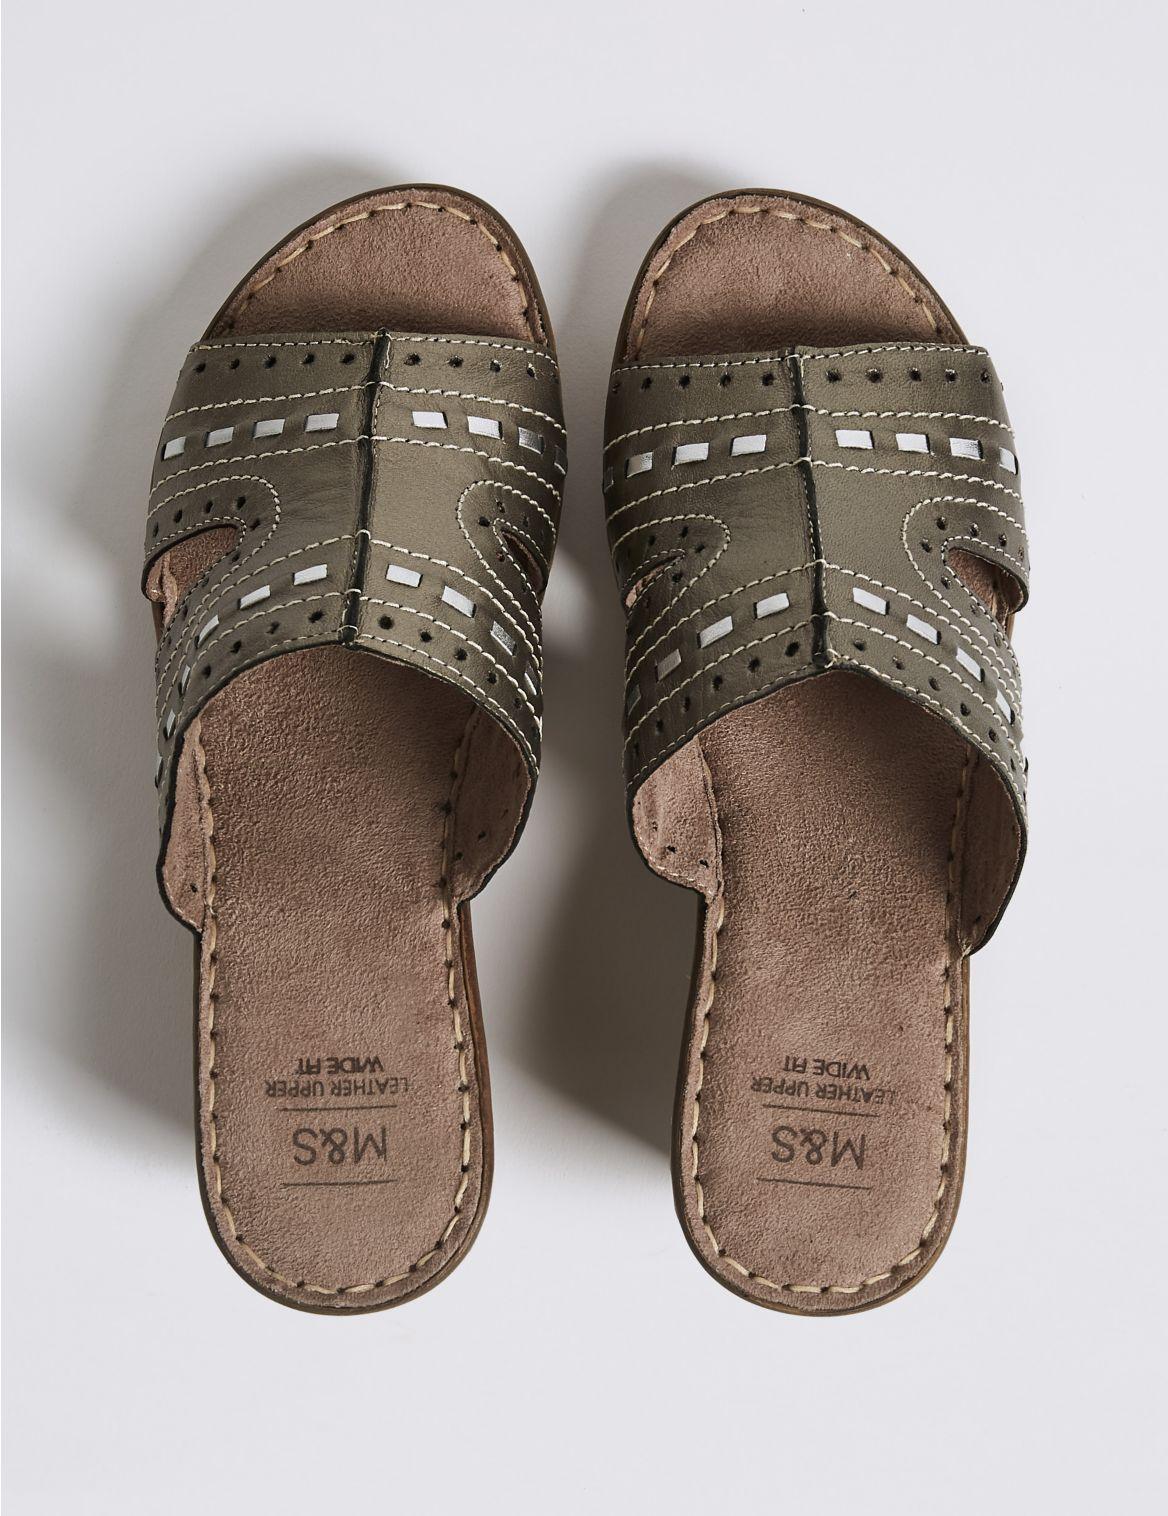 m and s sandals wide fit